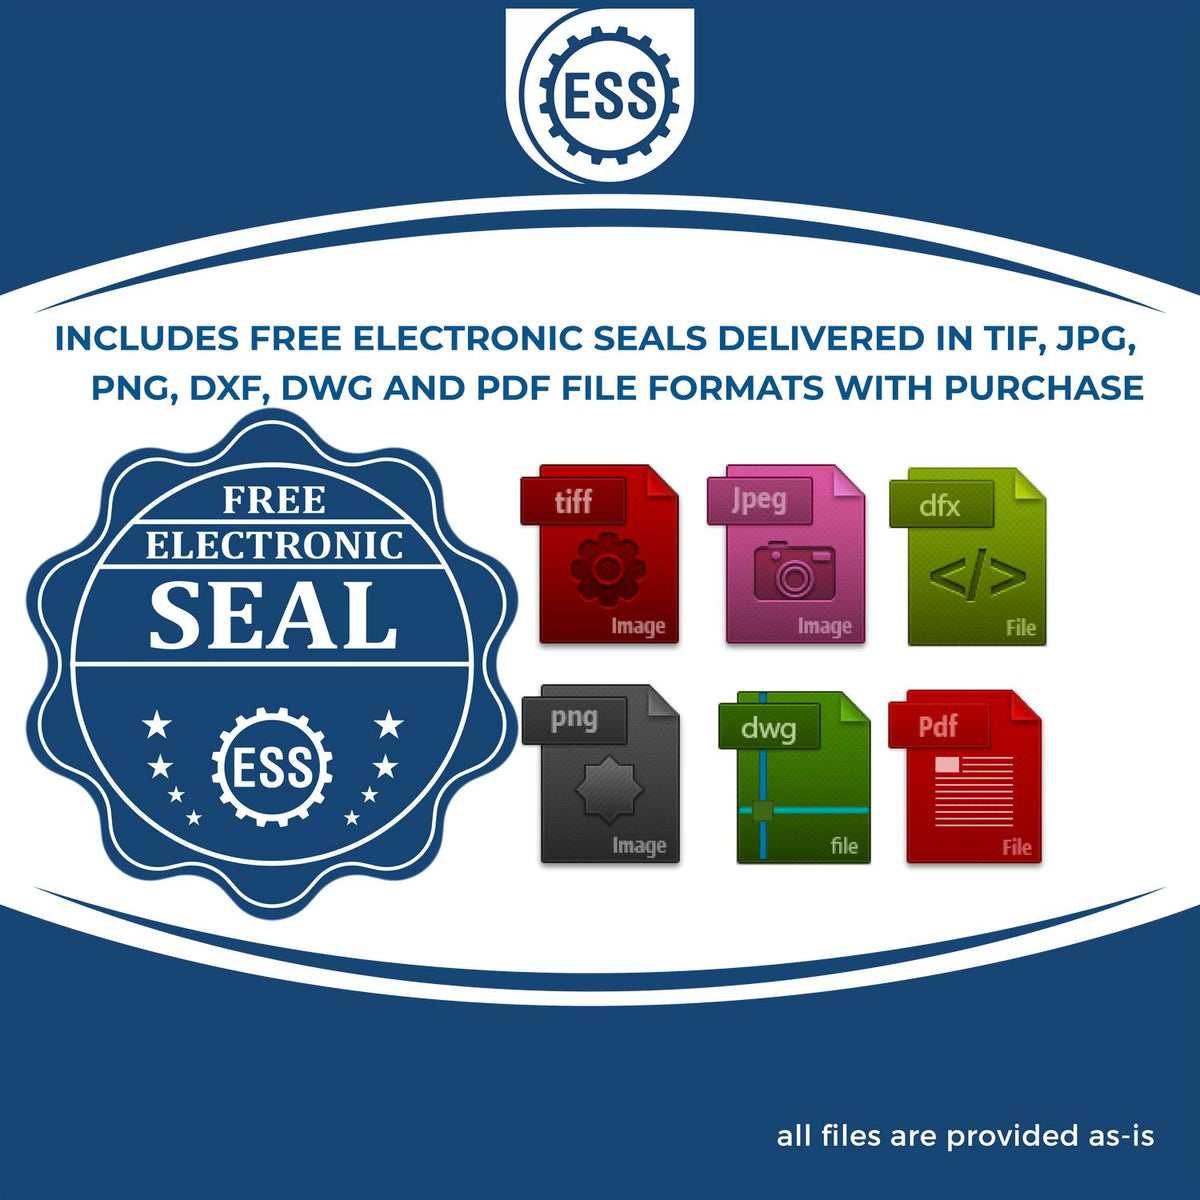 An infographic for the free electronic seal for the State of Idaho Extended Long Reach Engineer Seal illustrating the different file type icons such as DXF, DWG, TIF, JPG and PNG.